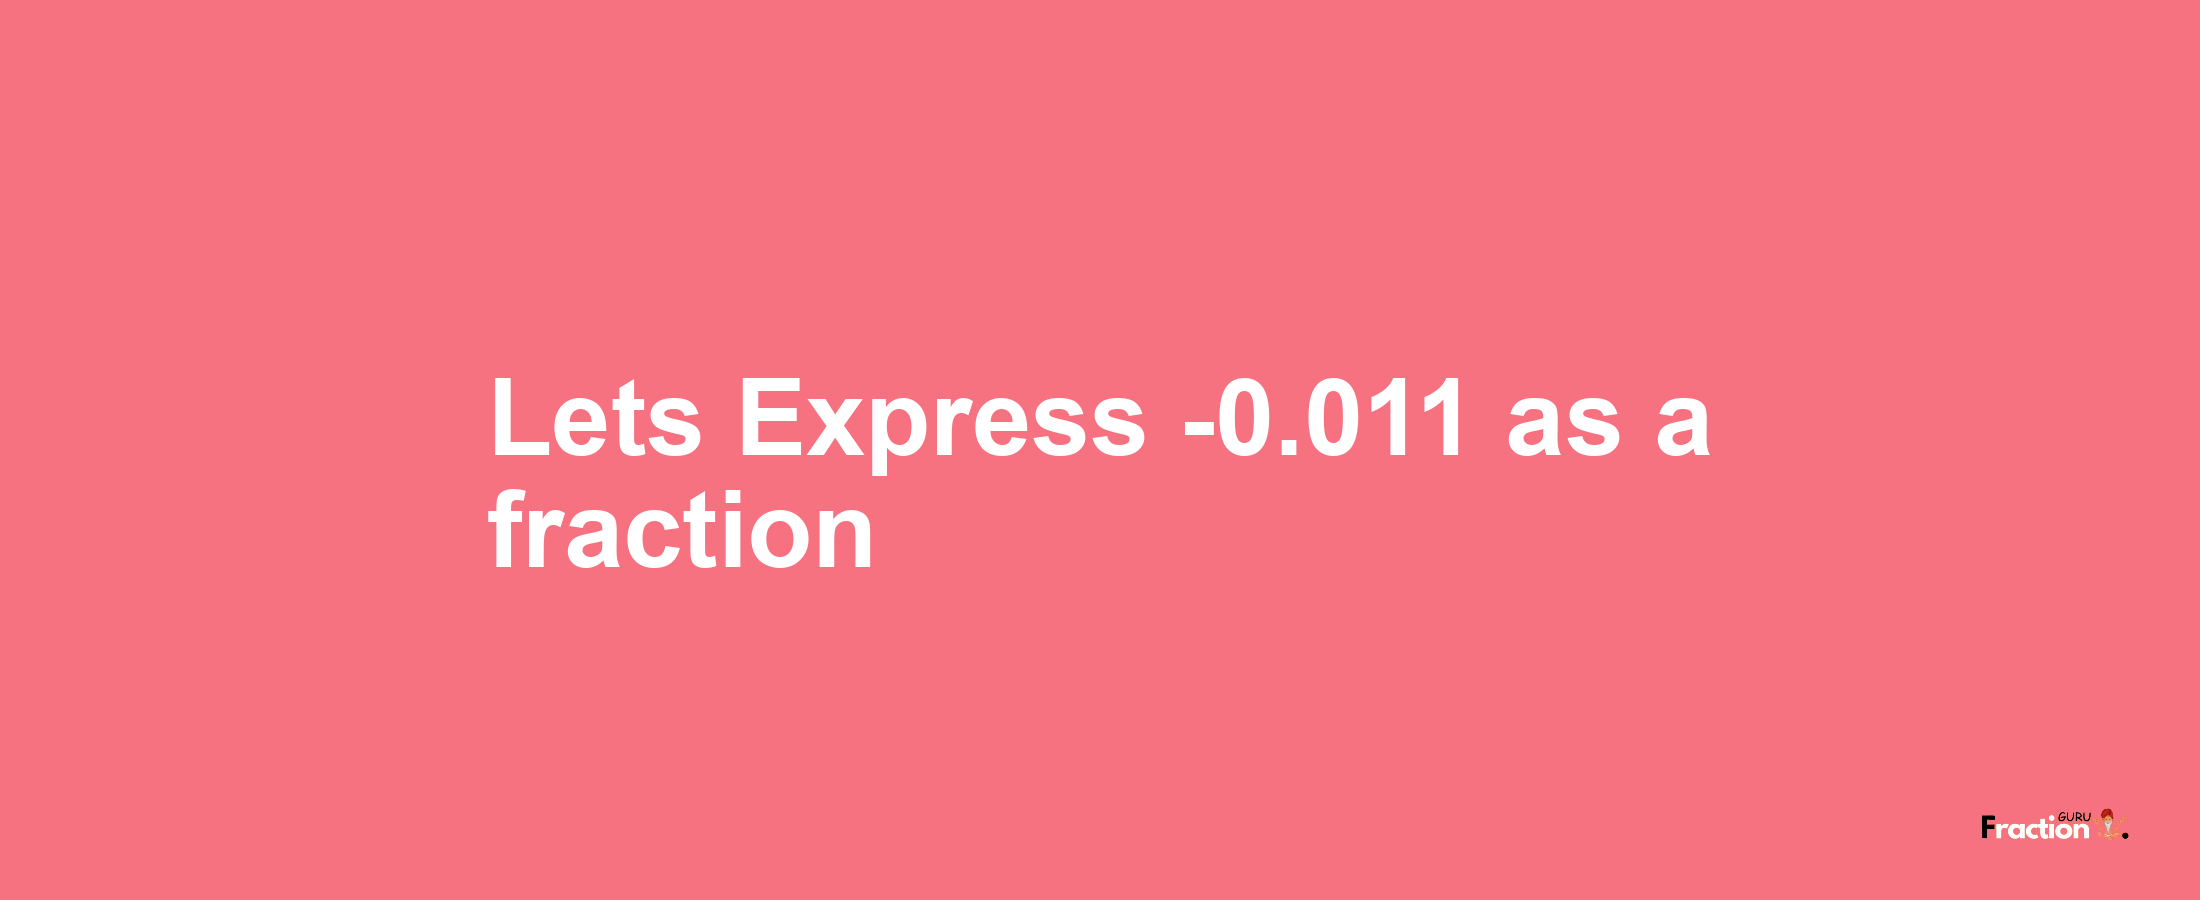 Lets Express -0.011 as afraction